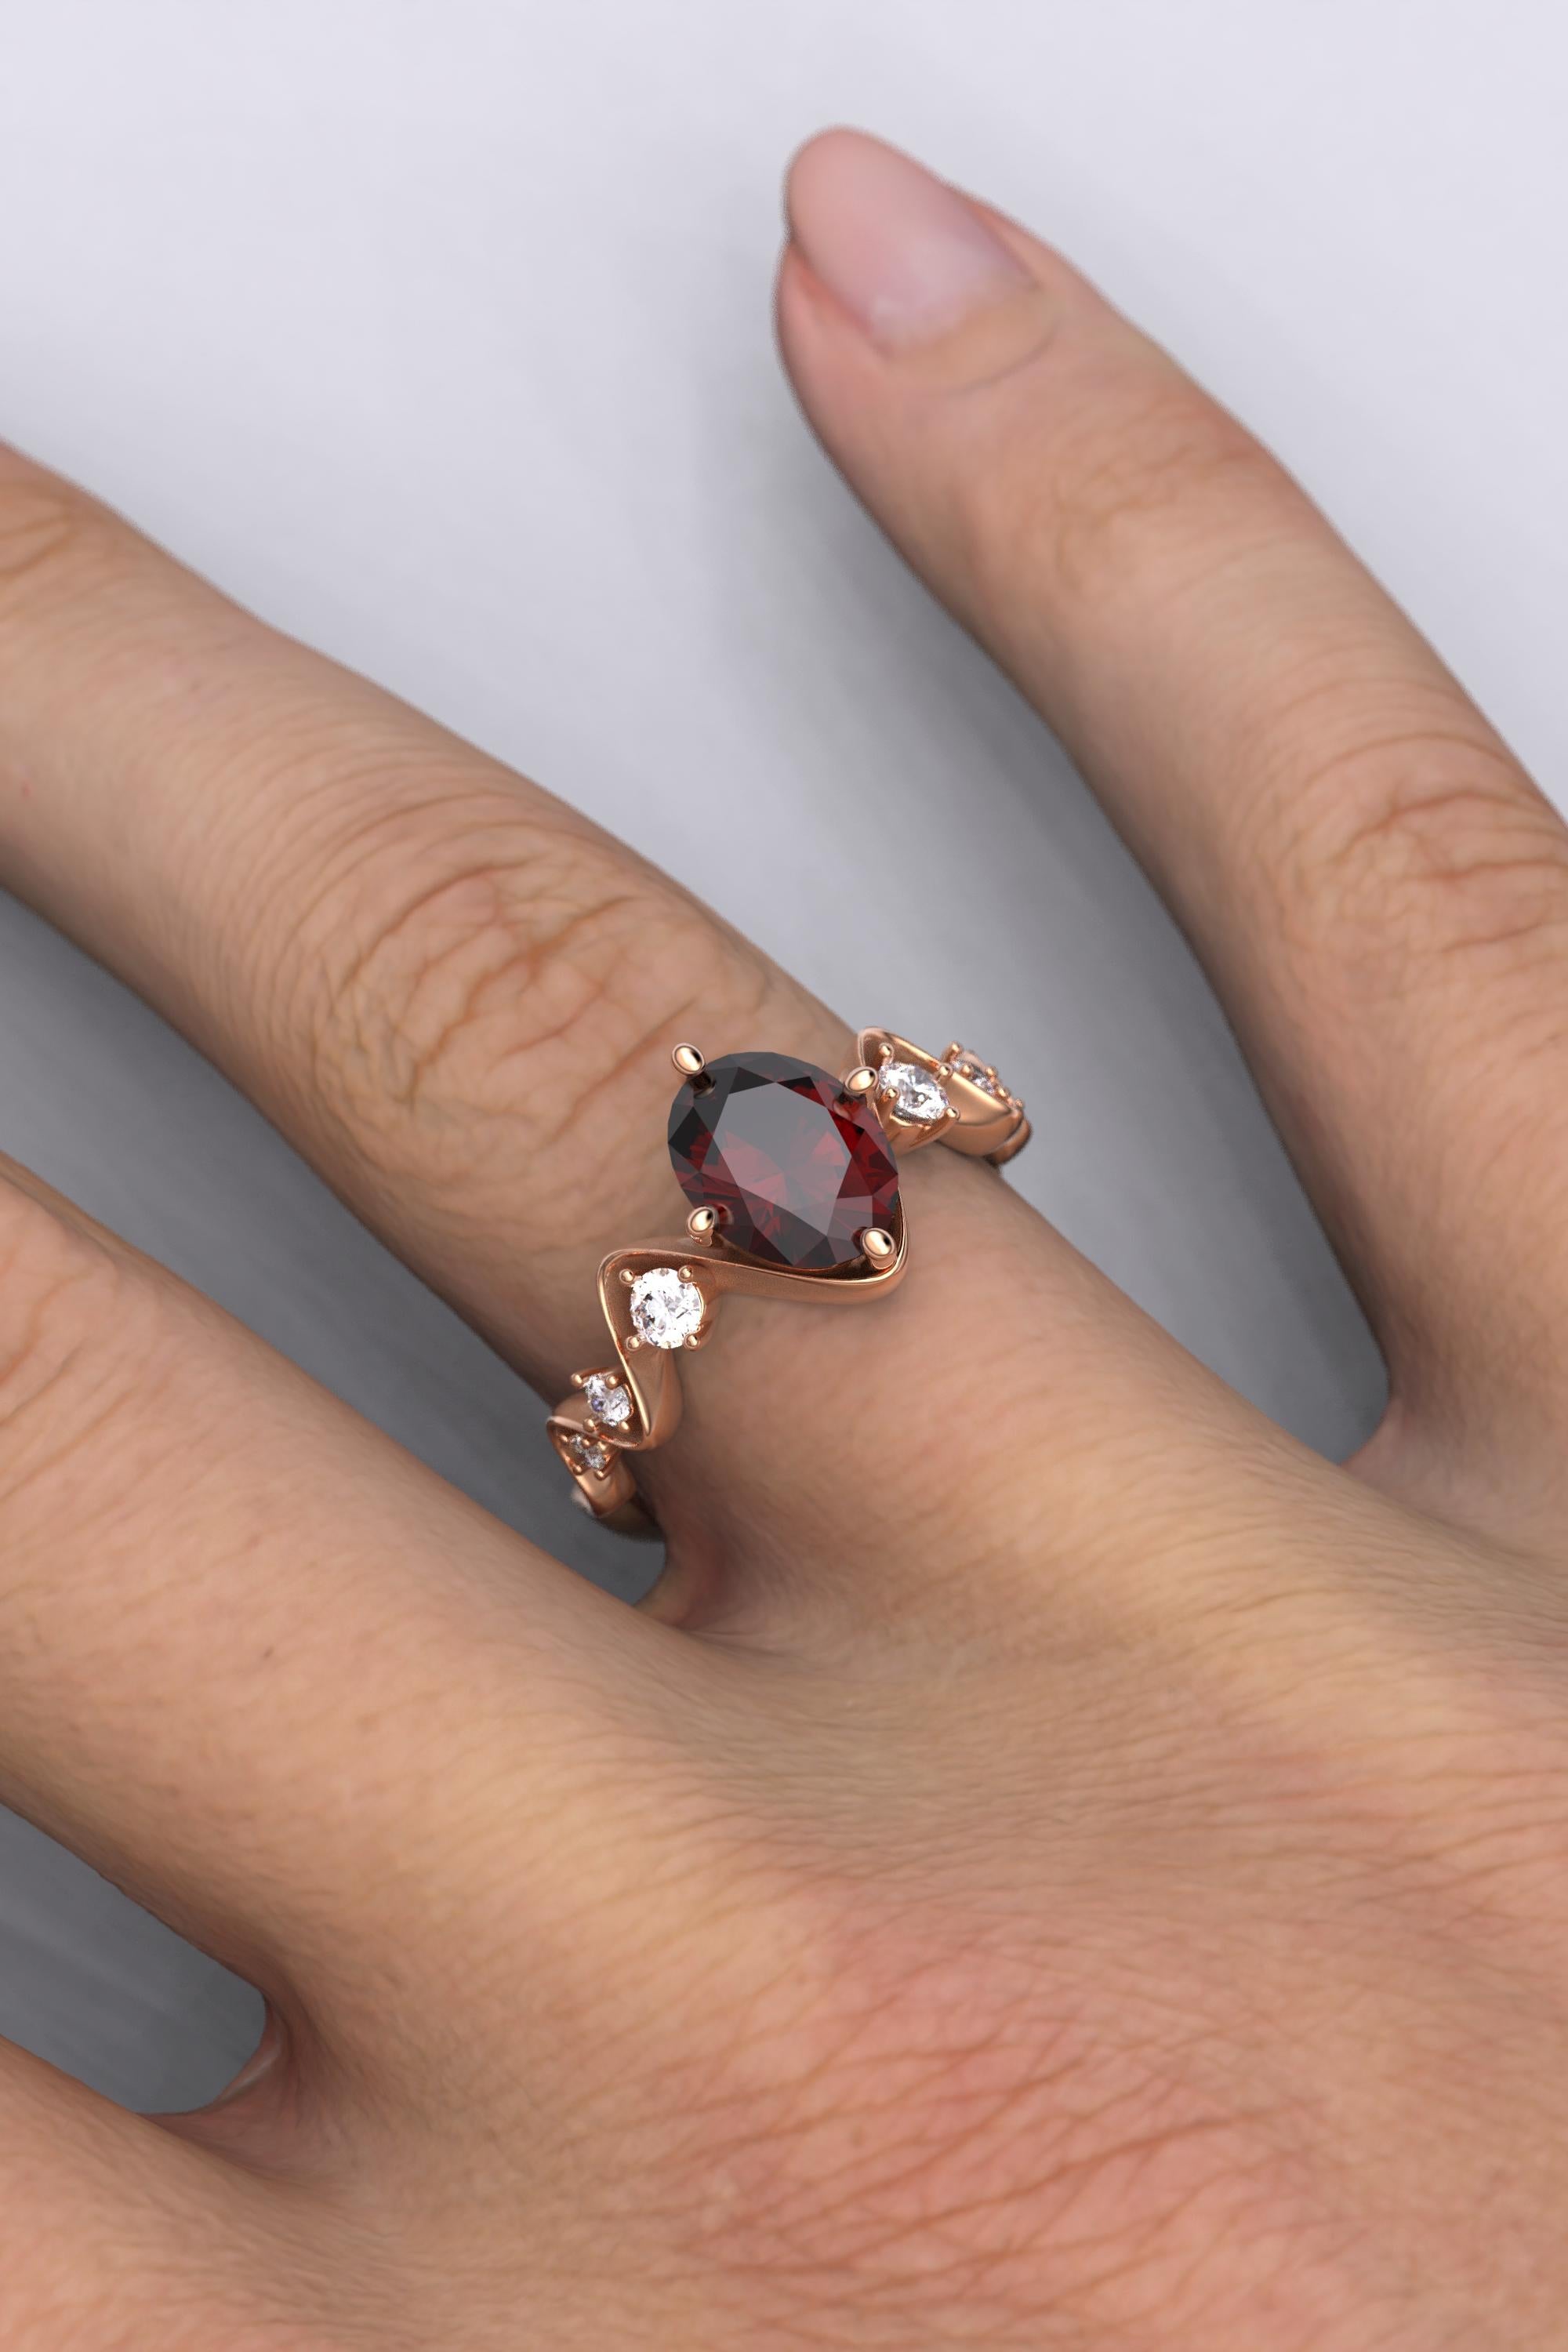 For Sale:  Garnet and Diamonds Engagement Ring Made in Italy by Oltremare Gioielli 18k Gold 6